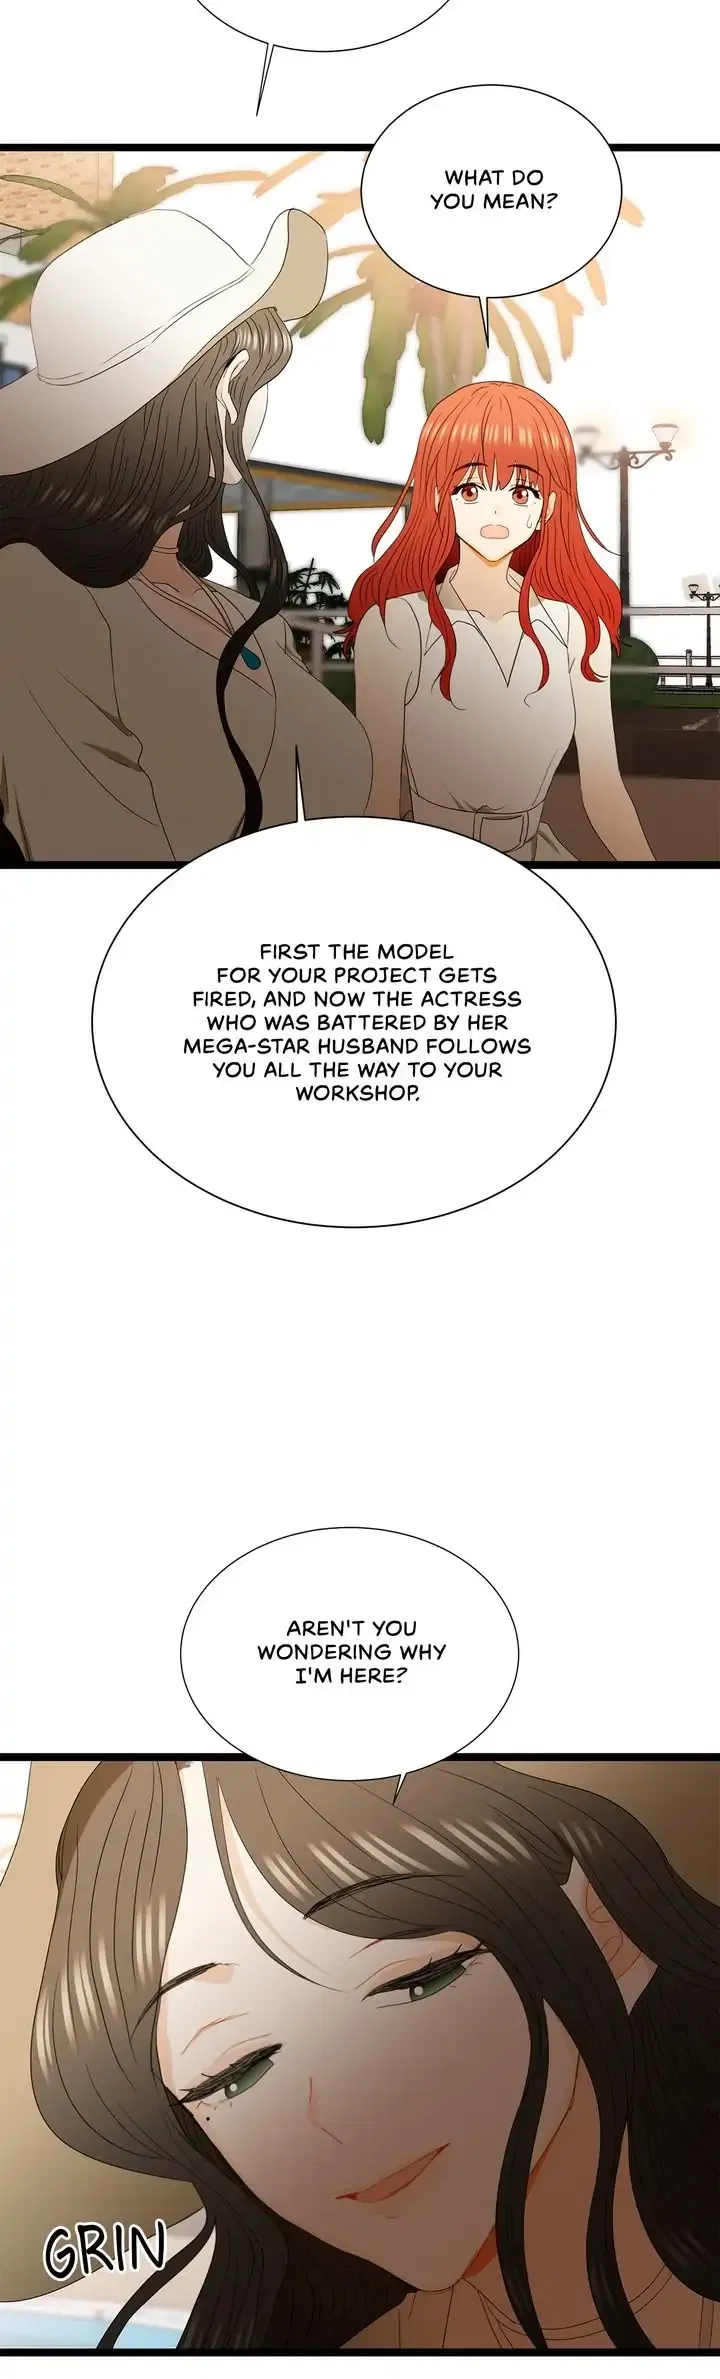 Faking It in Style Chapter 87 page 3